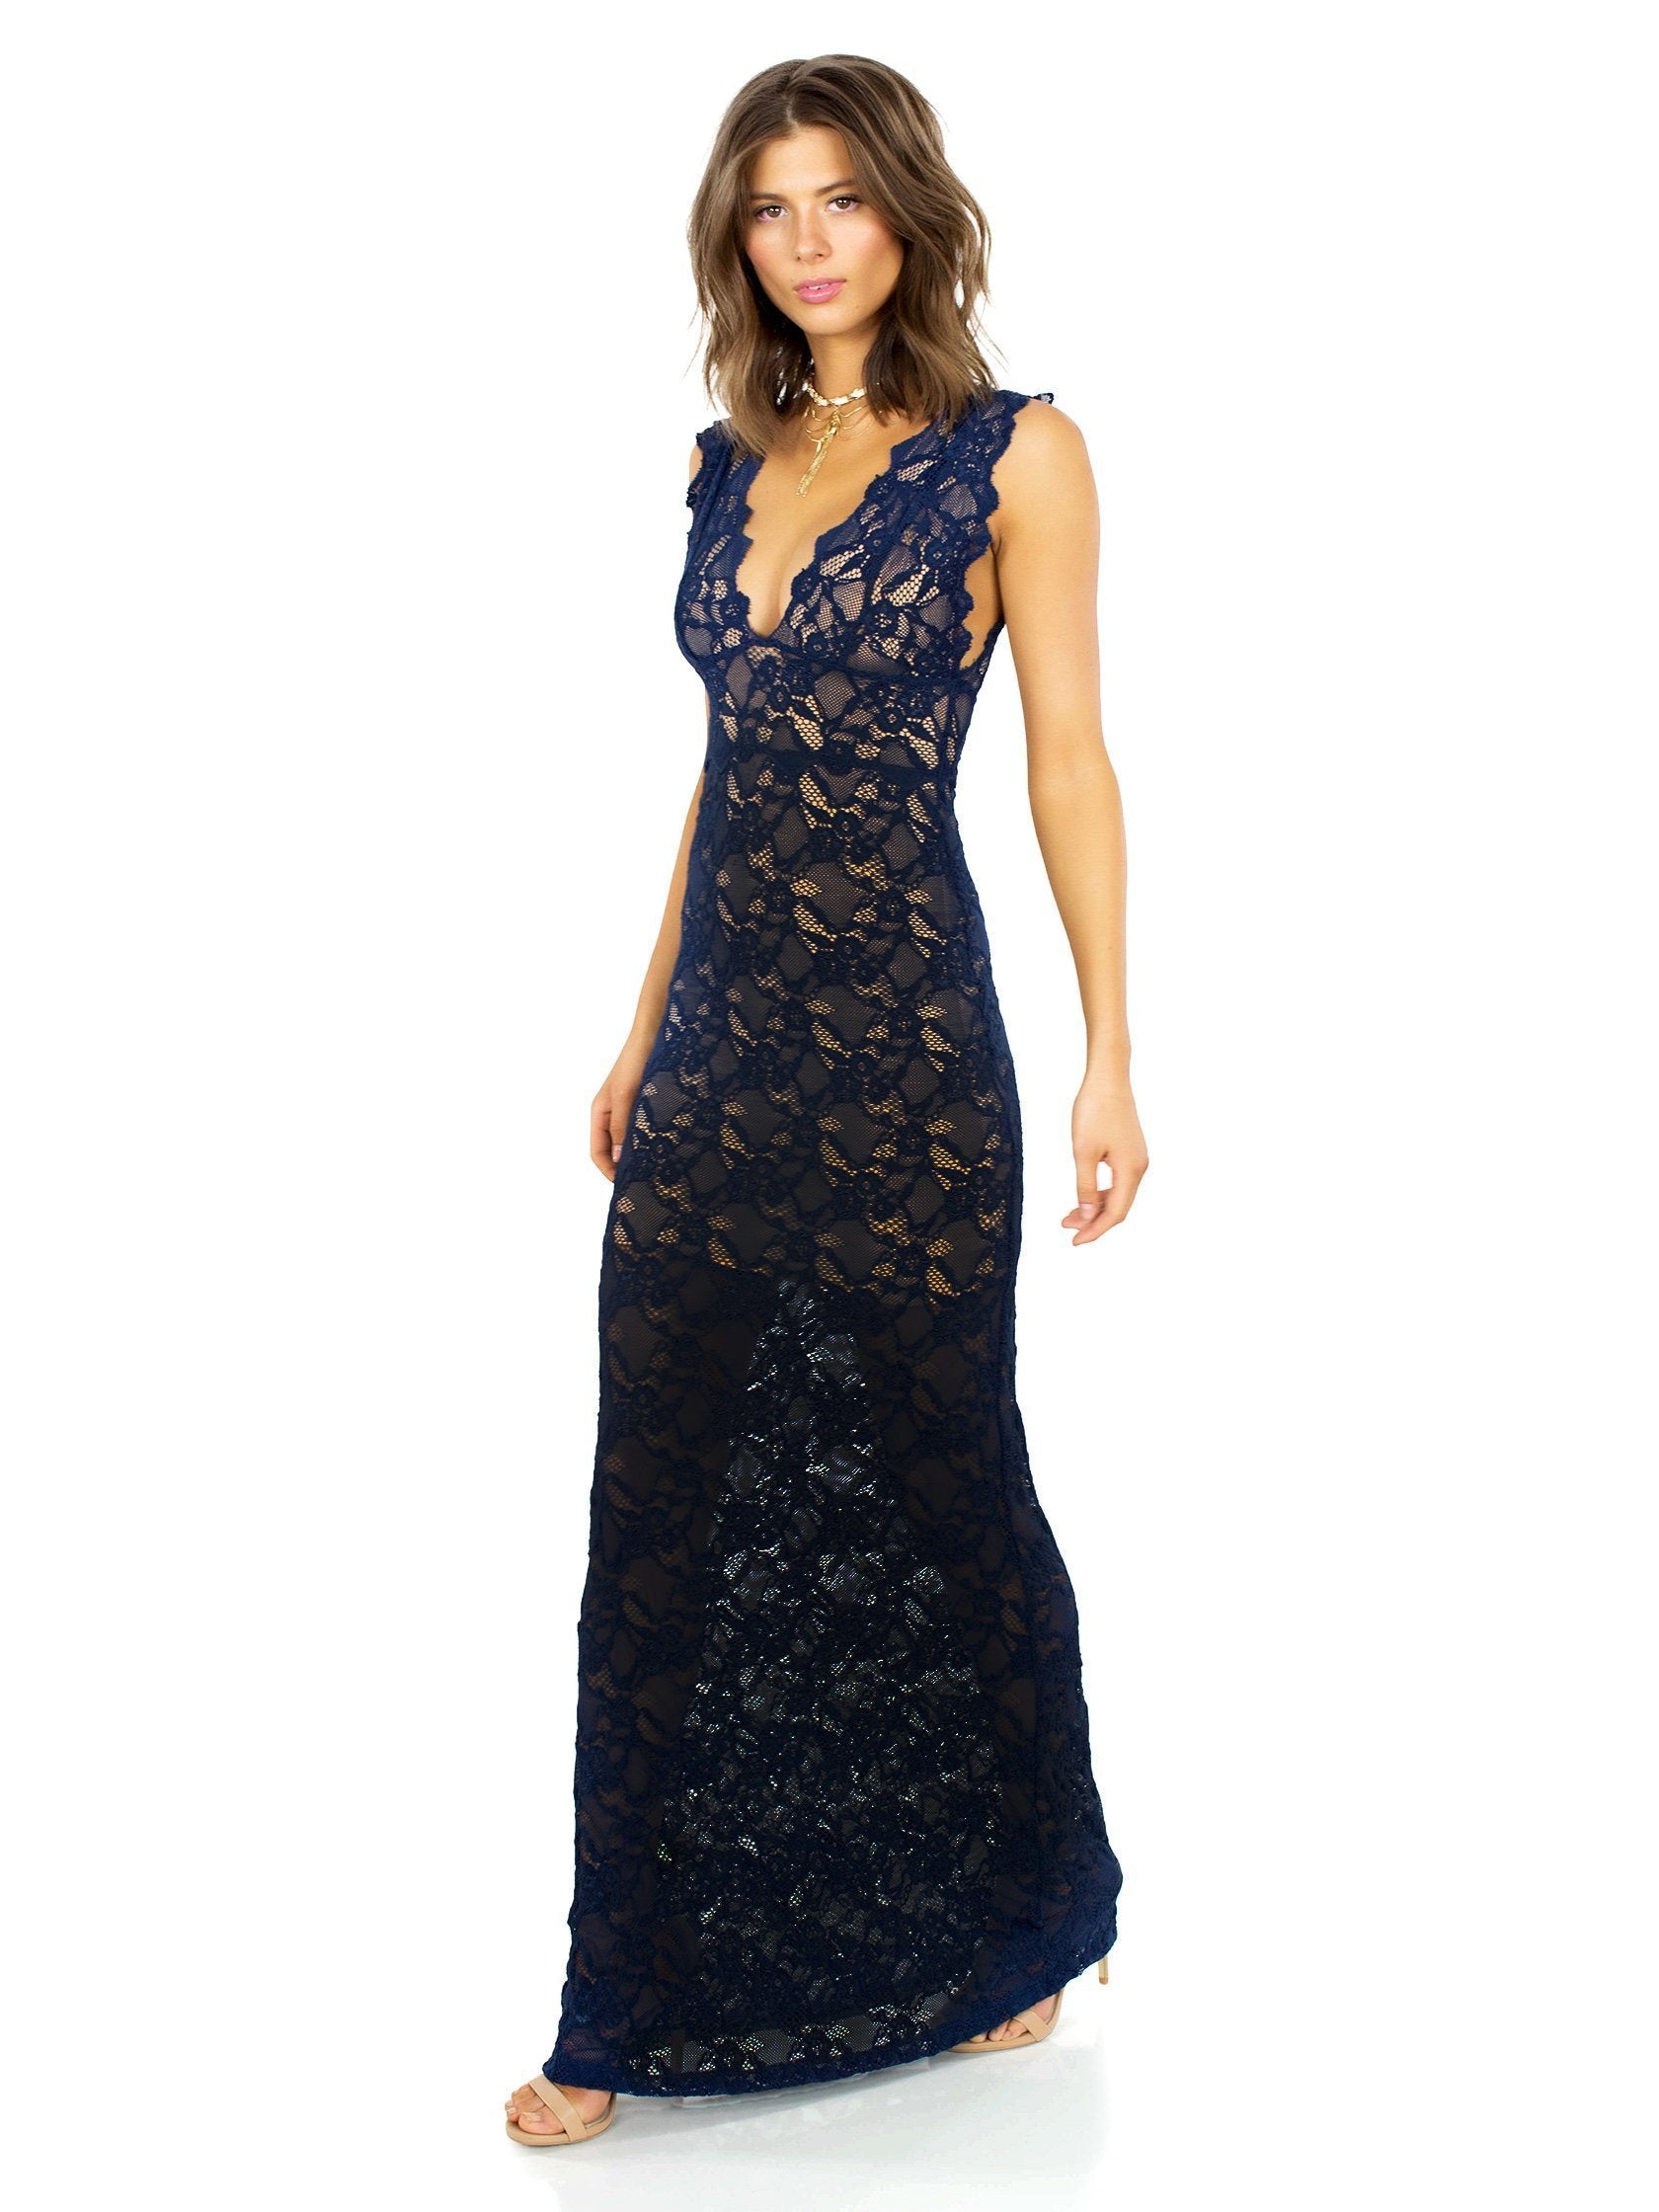 Woman wearing a dress rental from Nightcap Clothing called Perfect Plunge Maxi Dress